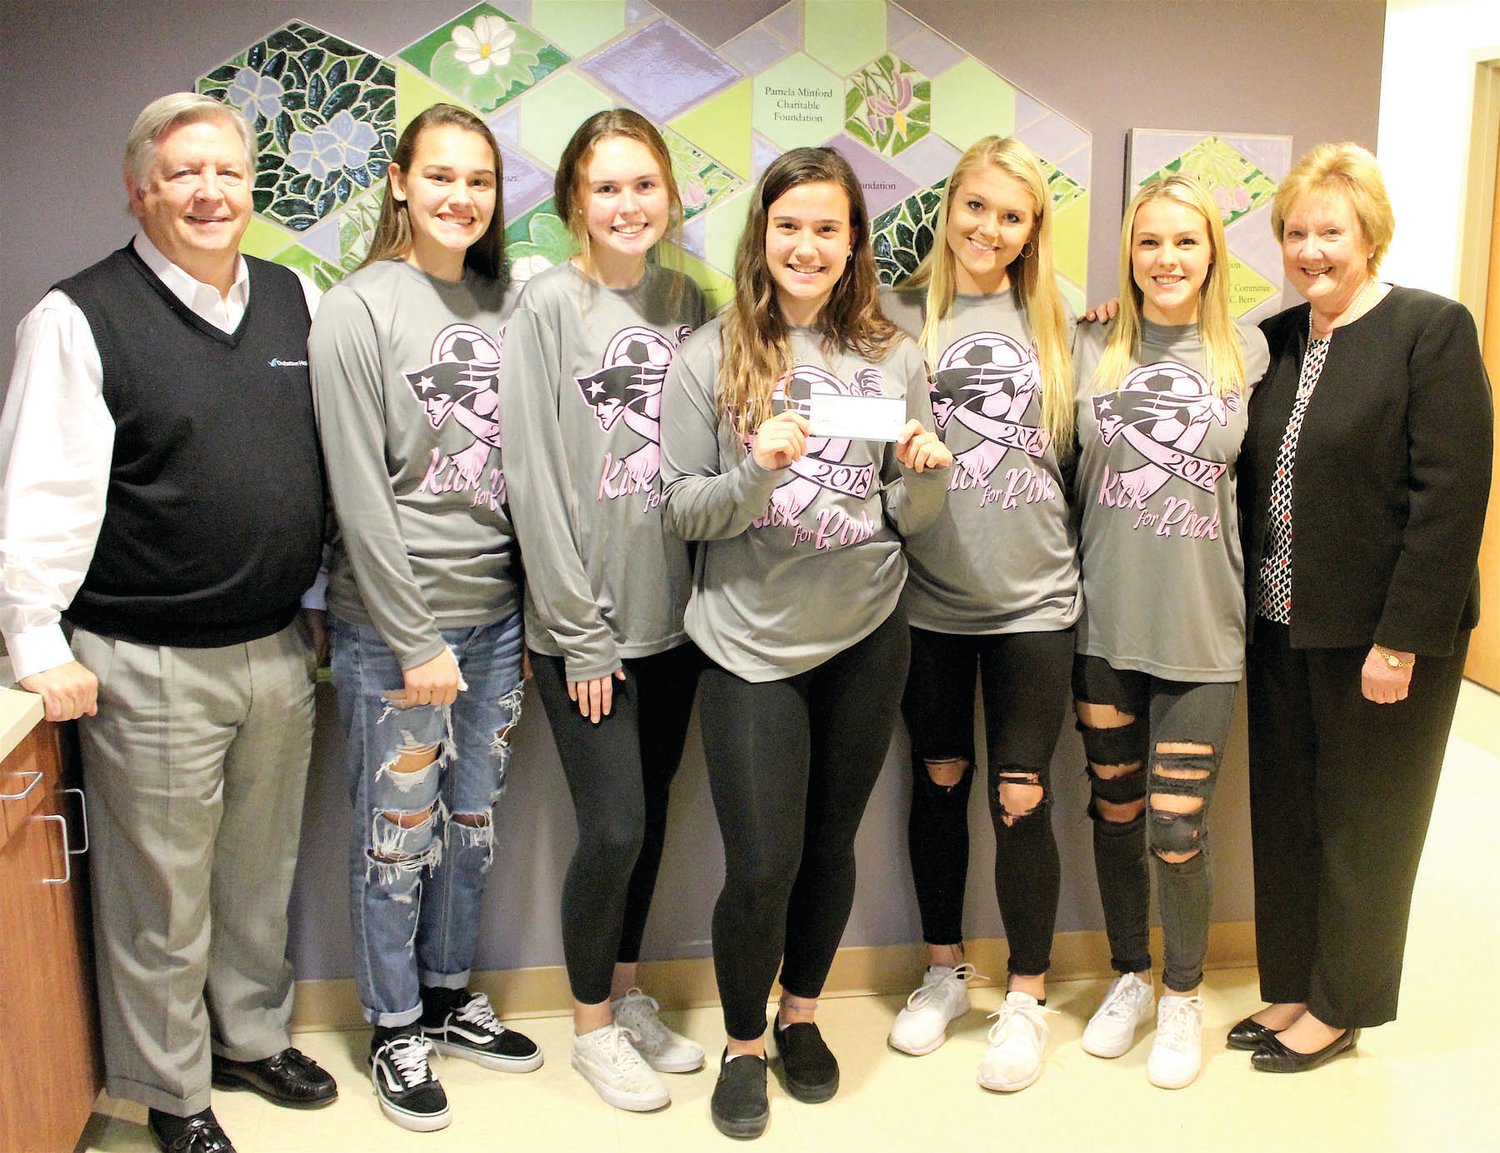 From left are: Jim Brexler, president and CEO, Doylestown Health; students Jenna Abaza, Meghan Gallagher, Trish Hauck, Kristen Obetz, Anna Bound and Cathy Benner, executive director of Rehab and Cancer Services. Not pictured are Ashley Balderson and Julie Beedle.